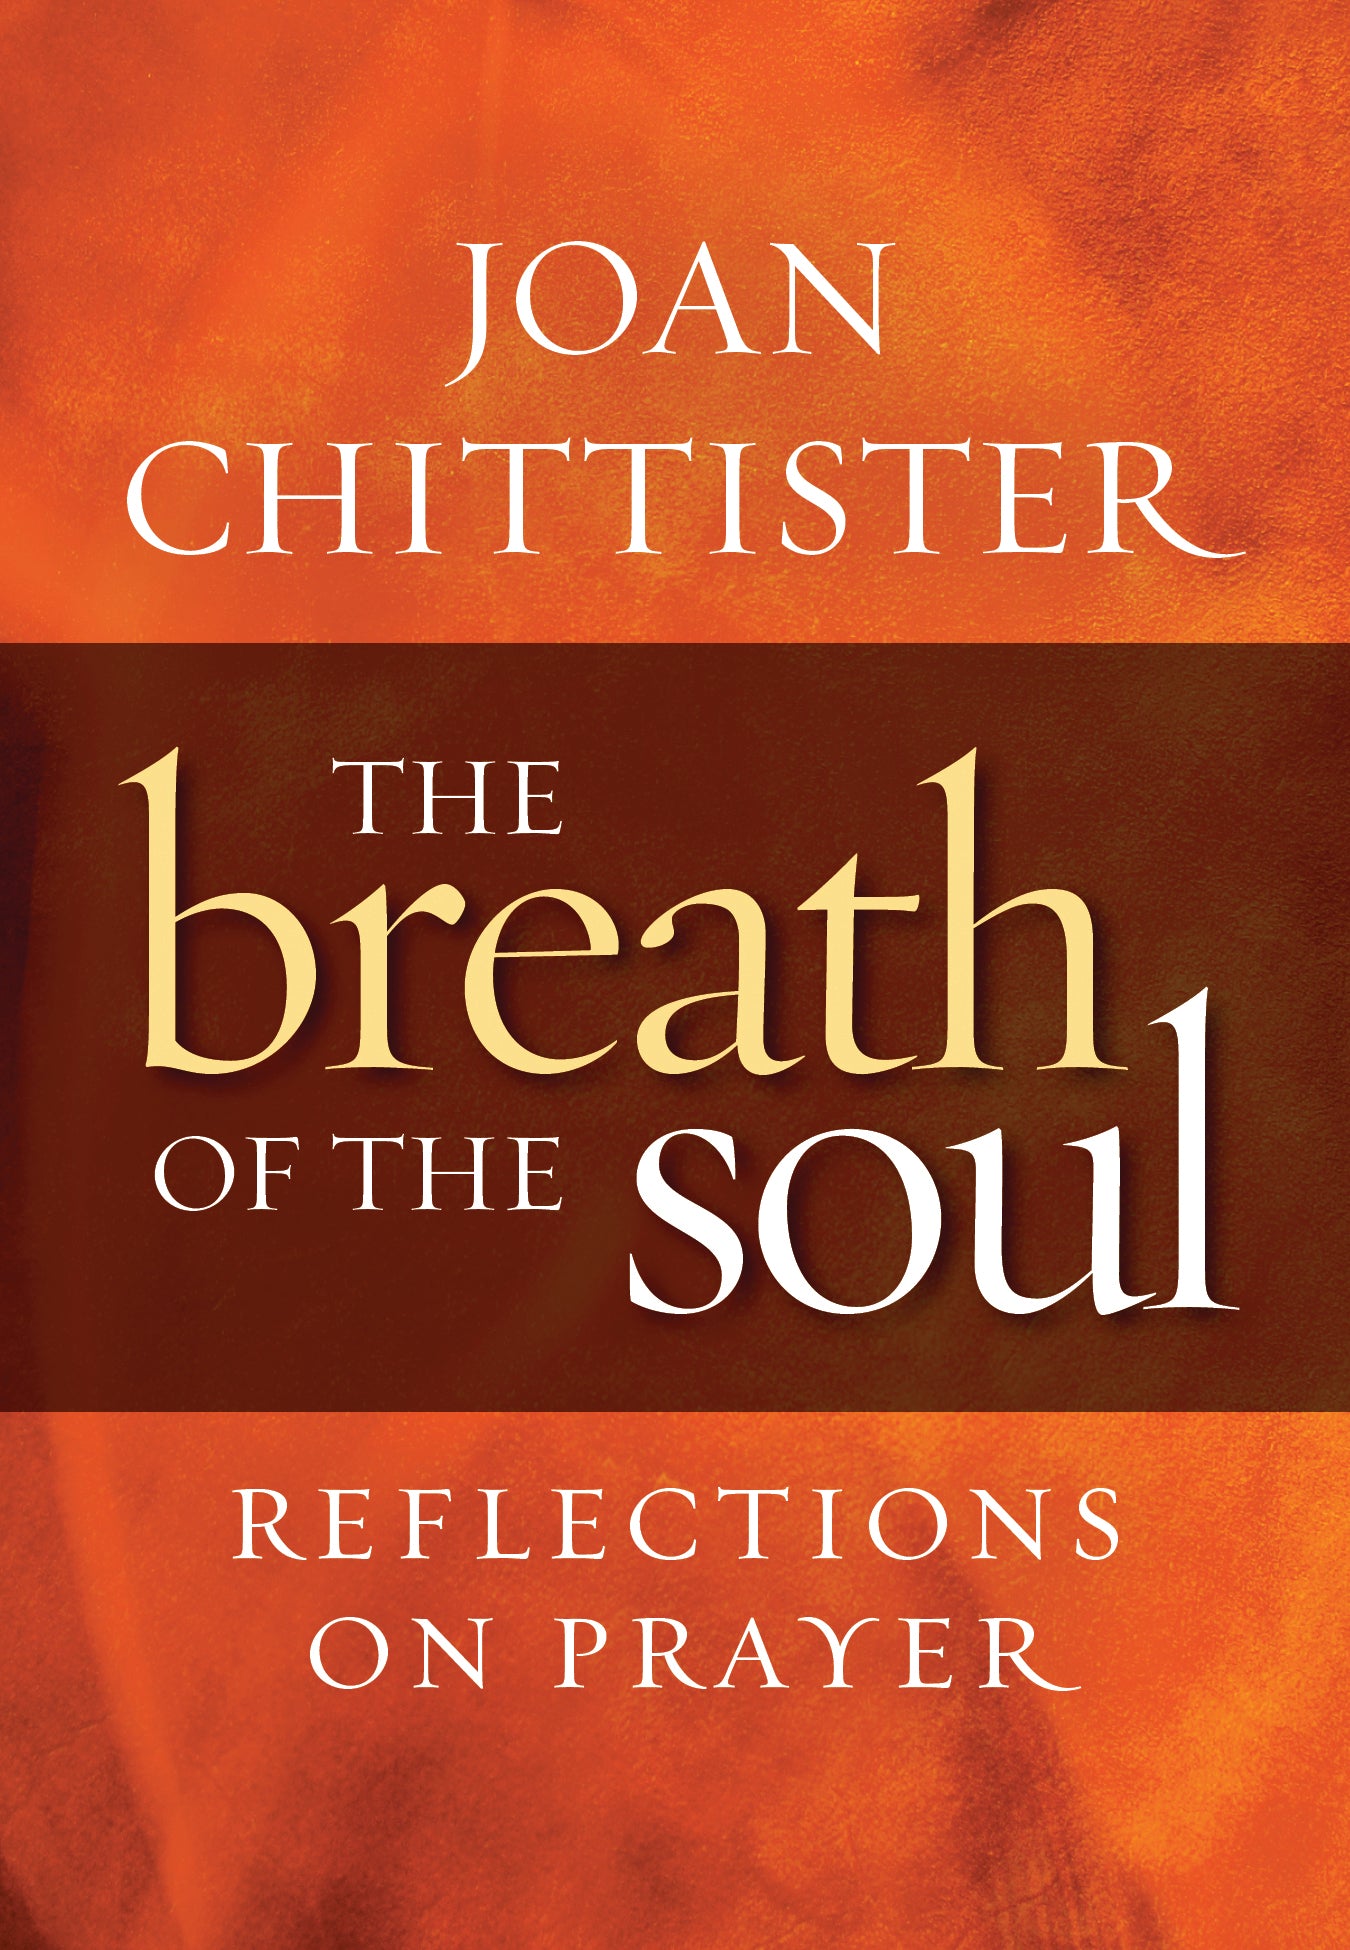 The Breath of the Soul (paperback)